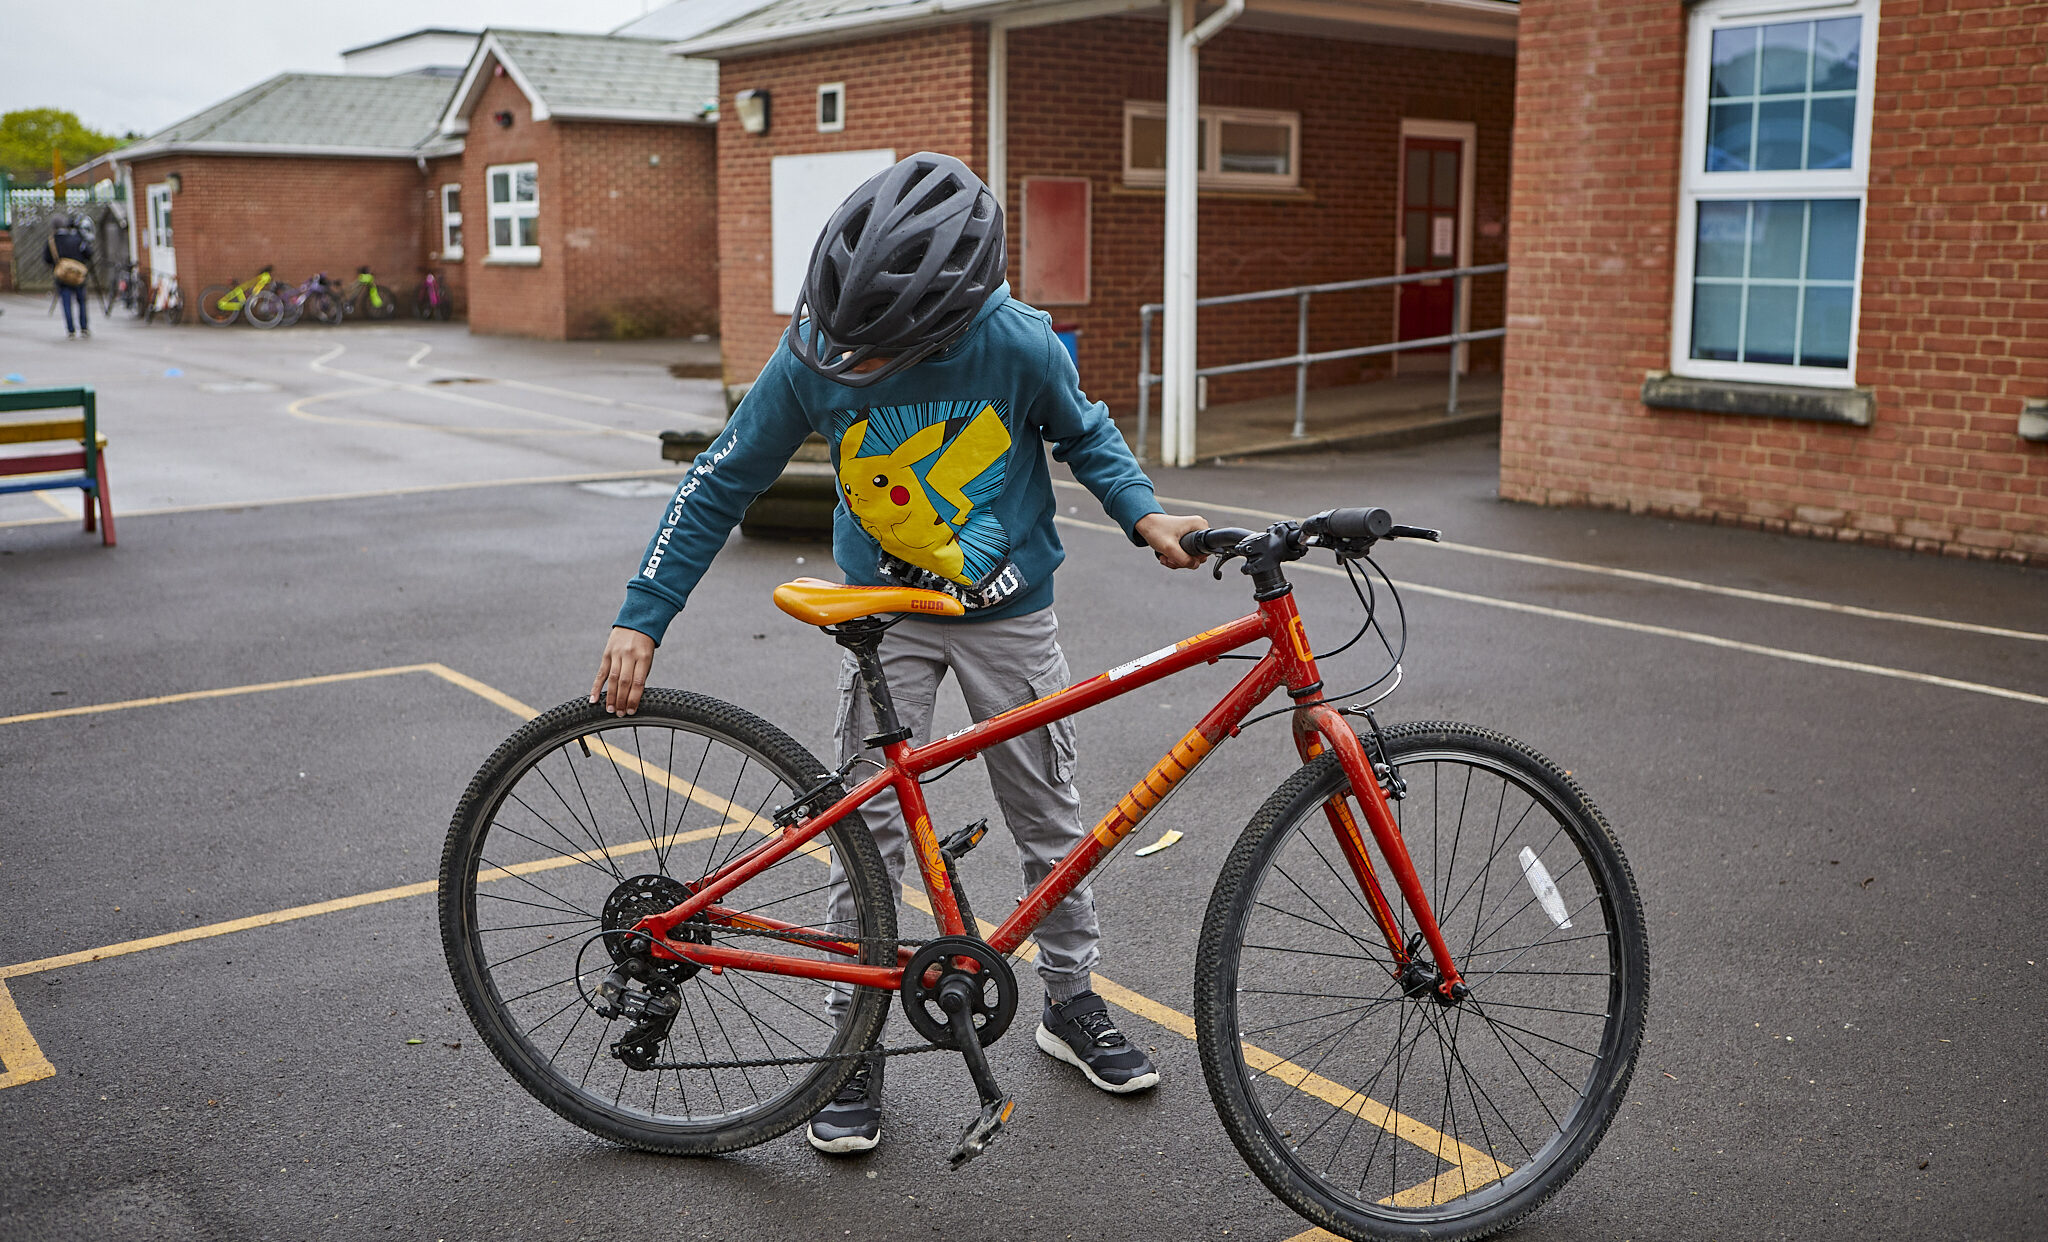 A young boy in a playground checking his bicycle tyres. His bike is red and he is wearing a green and yellow jumper and a bike helmet.